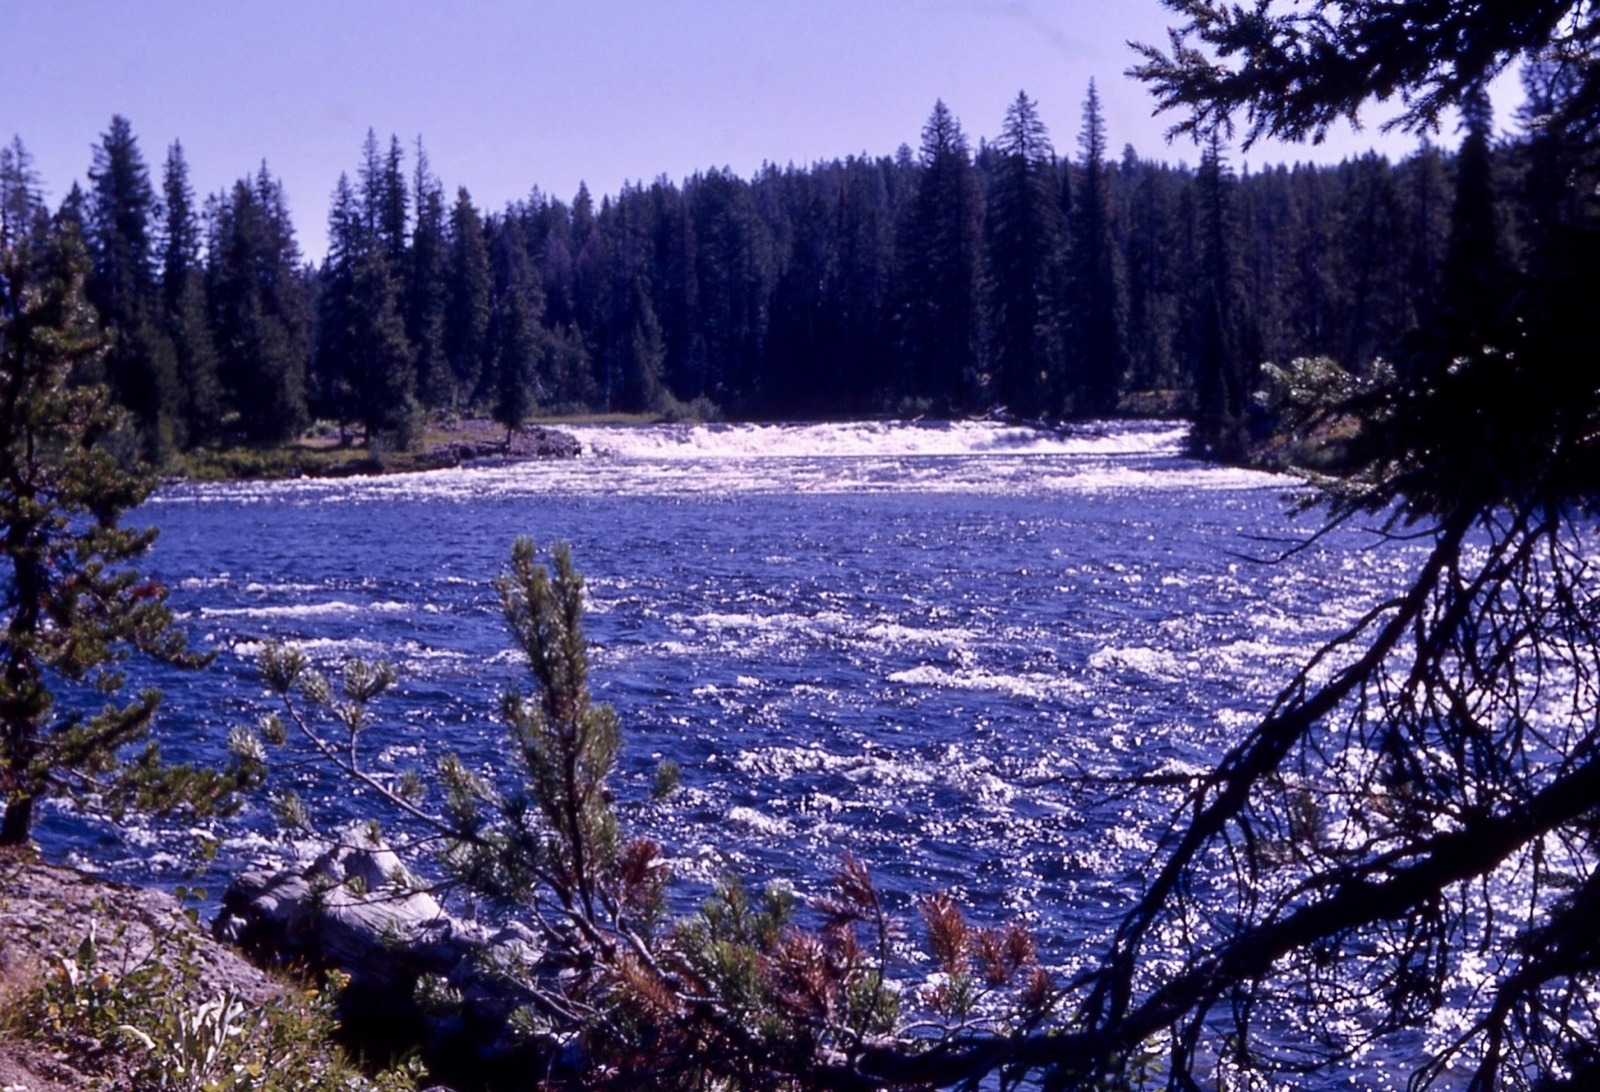 In the 1920s, farmers and irrigators in Idaho worked to muster support from the U.S. Department of Interior to build a dam and impoundment on the Fall River, pictured here, to give them more water for growing crops.  It would have come at a huge ecological cost to the southwest corner of Yellowstone, also known as the "Cascade Corner" because of its abundance of waterfalls. It also would have affected wildlife habitat and angling. It was almost built.  Photo courtesy NPS 